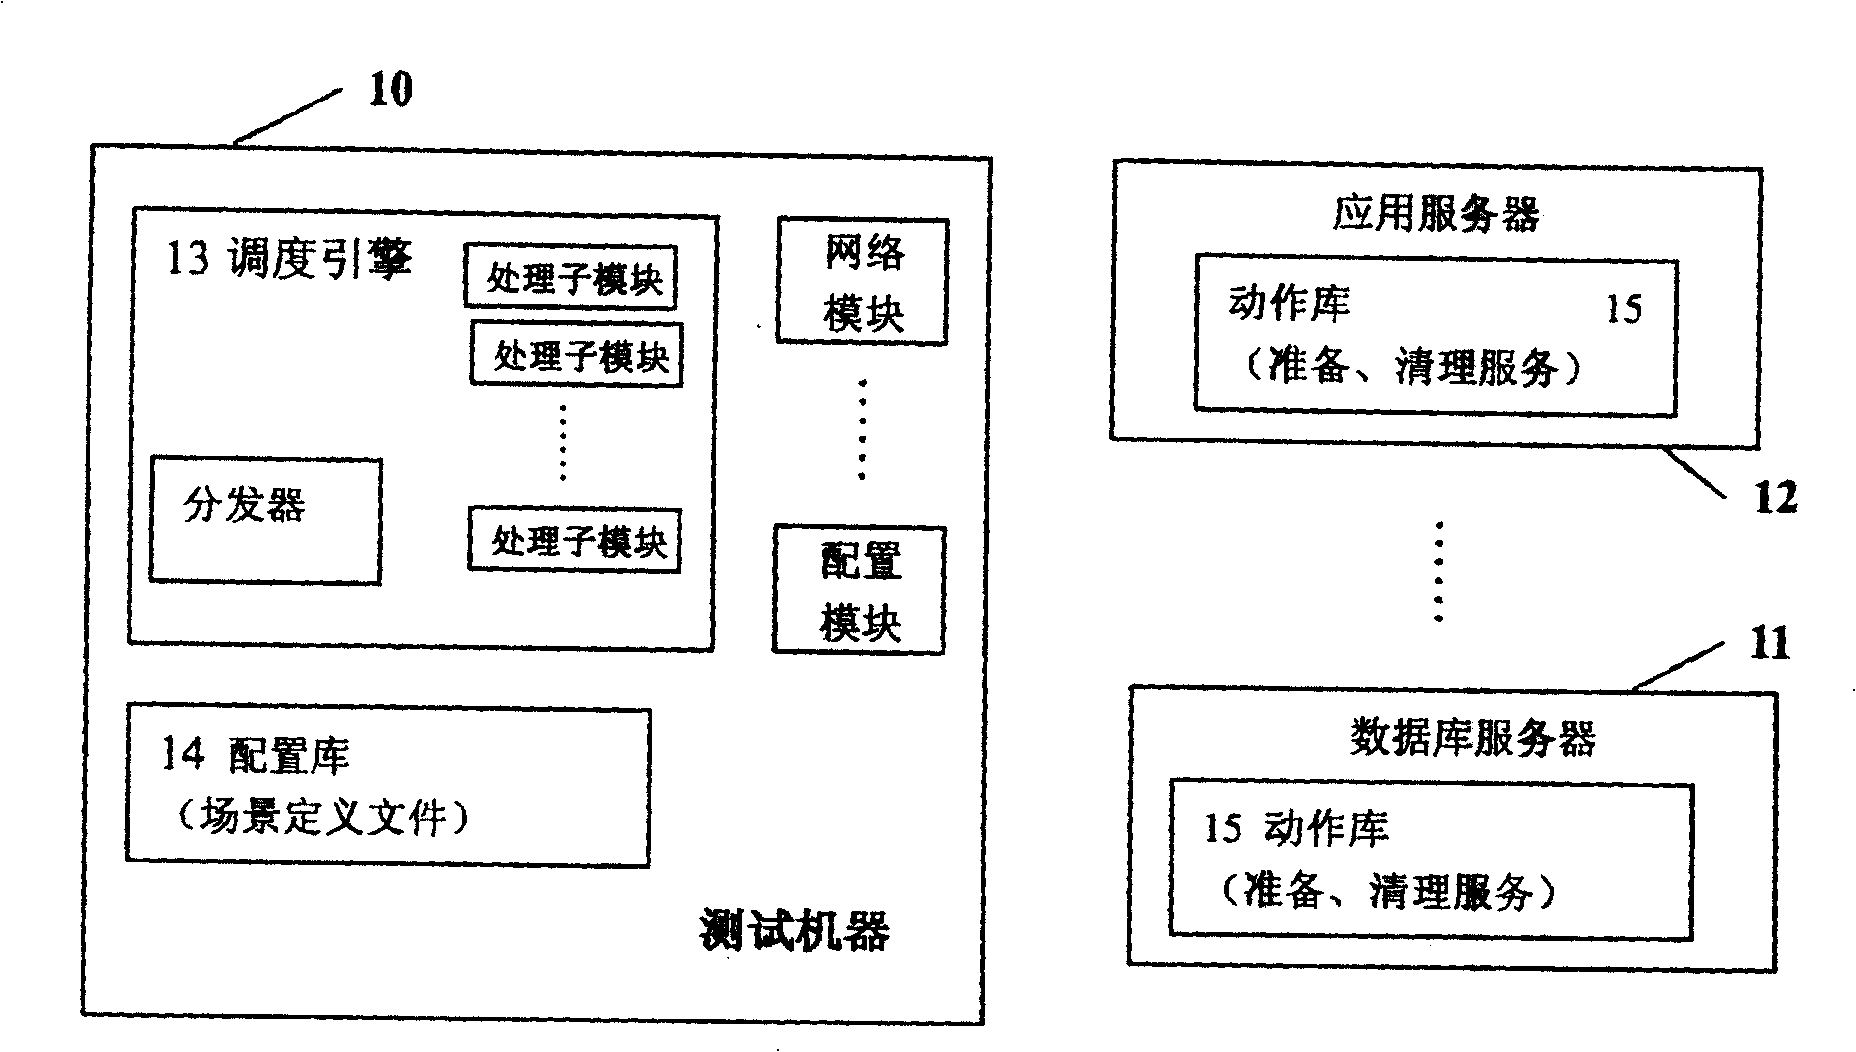 Multi- test scene automatic dispatch system and method